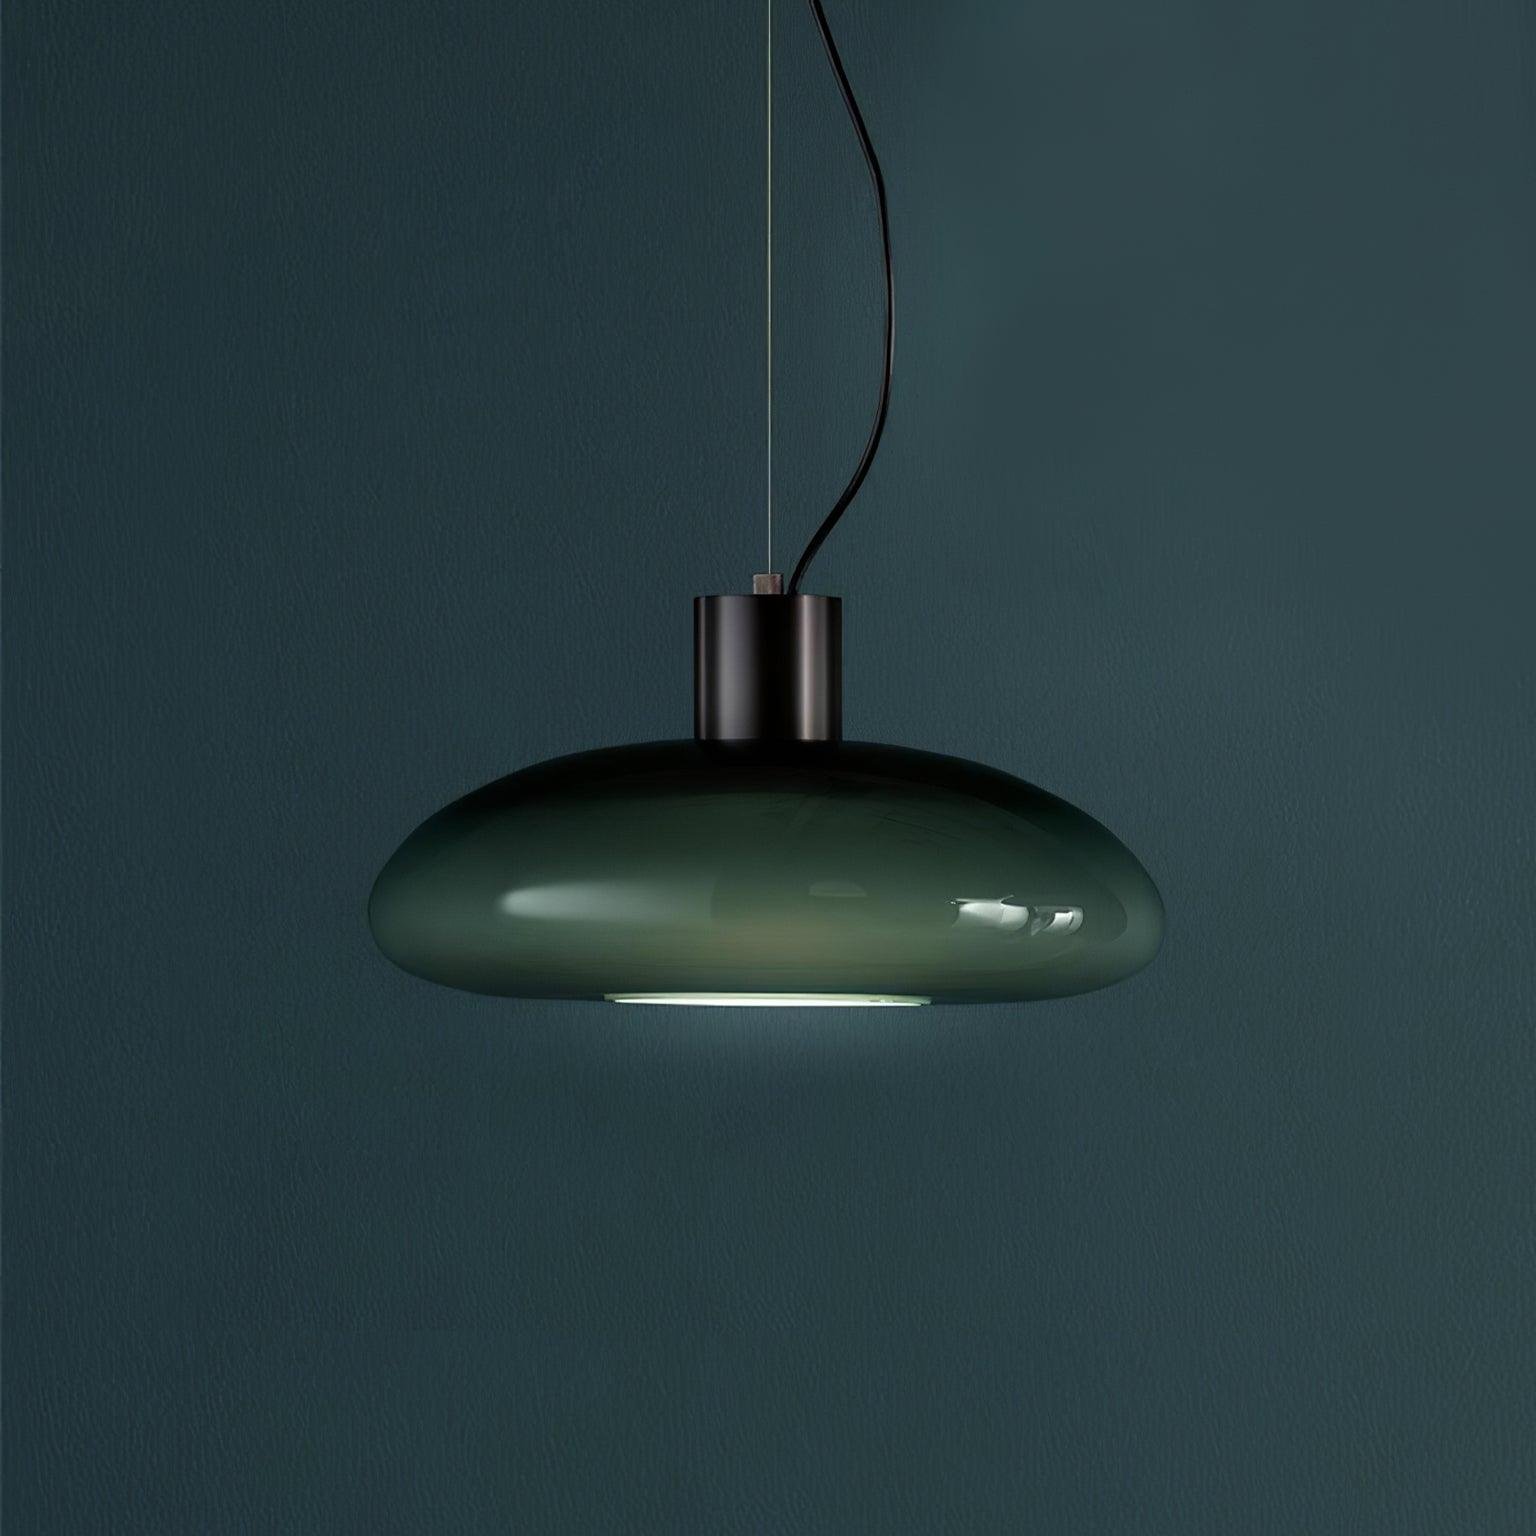 Acquerelli Pendant Light, Size: Diameter 15.7 inches x Height 8.1 inches (40cm x 20.5cm), Shown in the Image